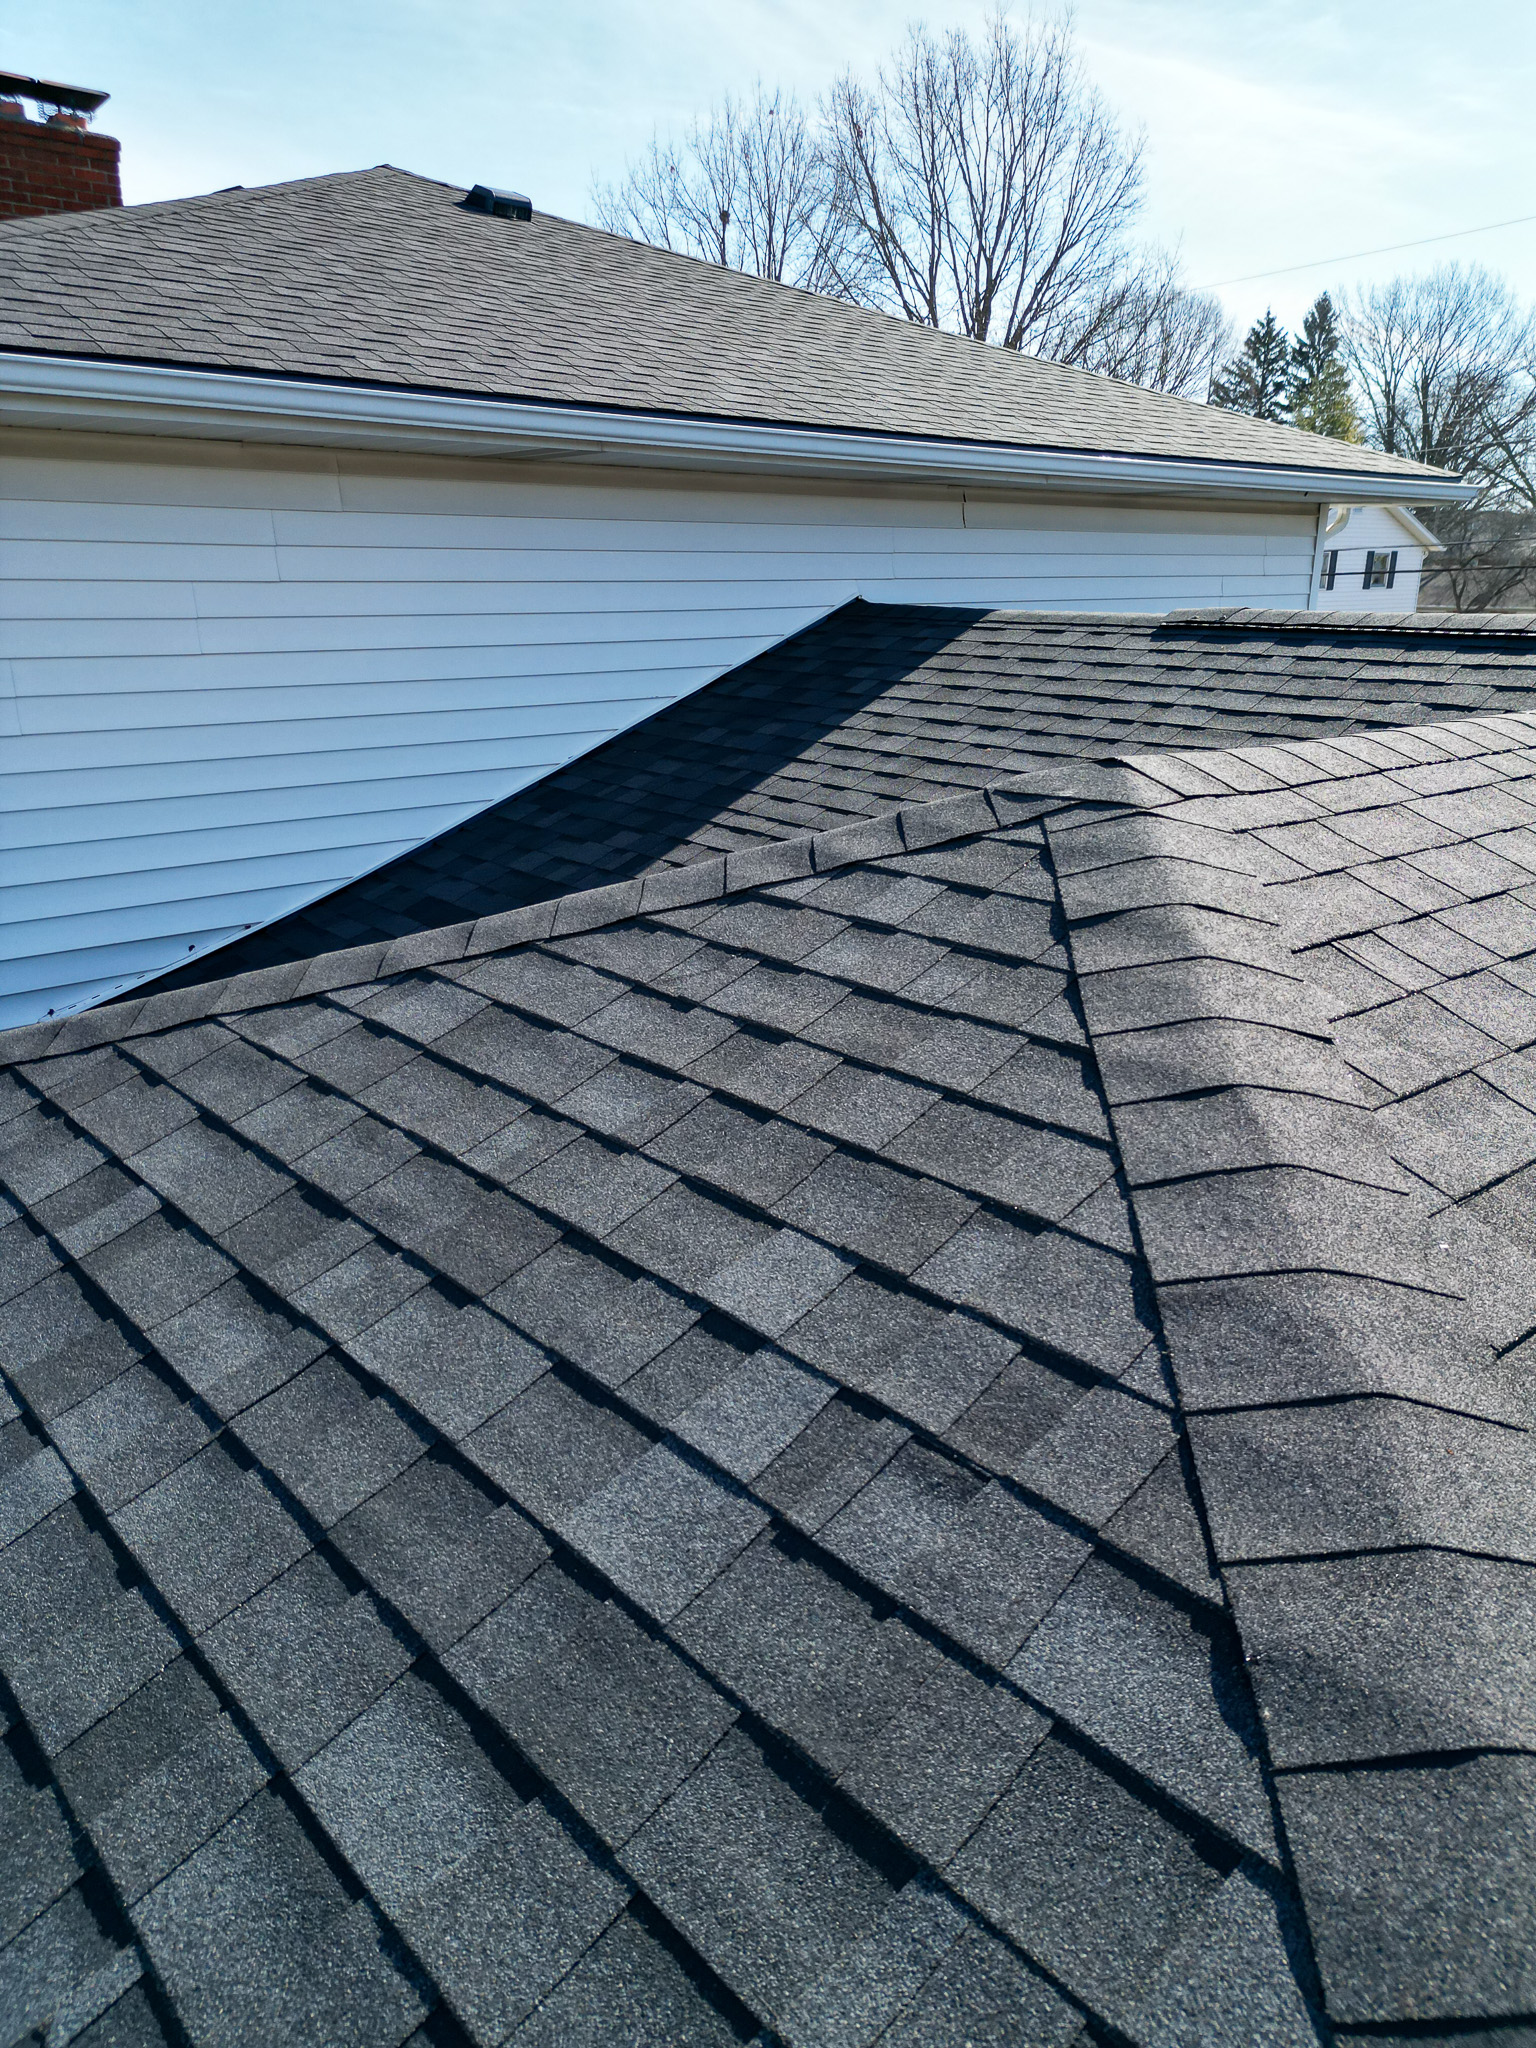 Key Factors to Consider in Residential Roofing Installation